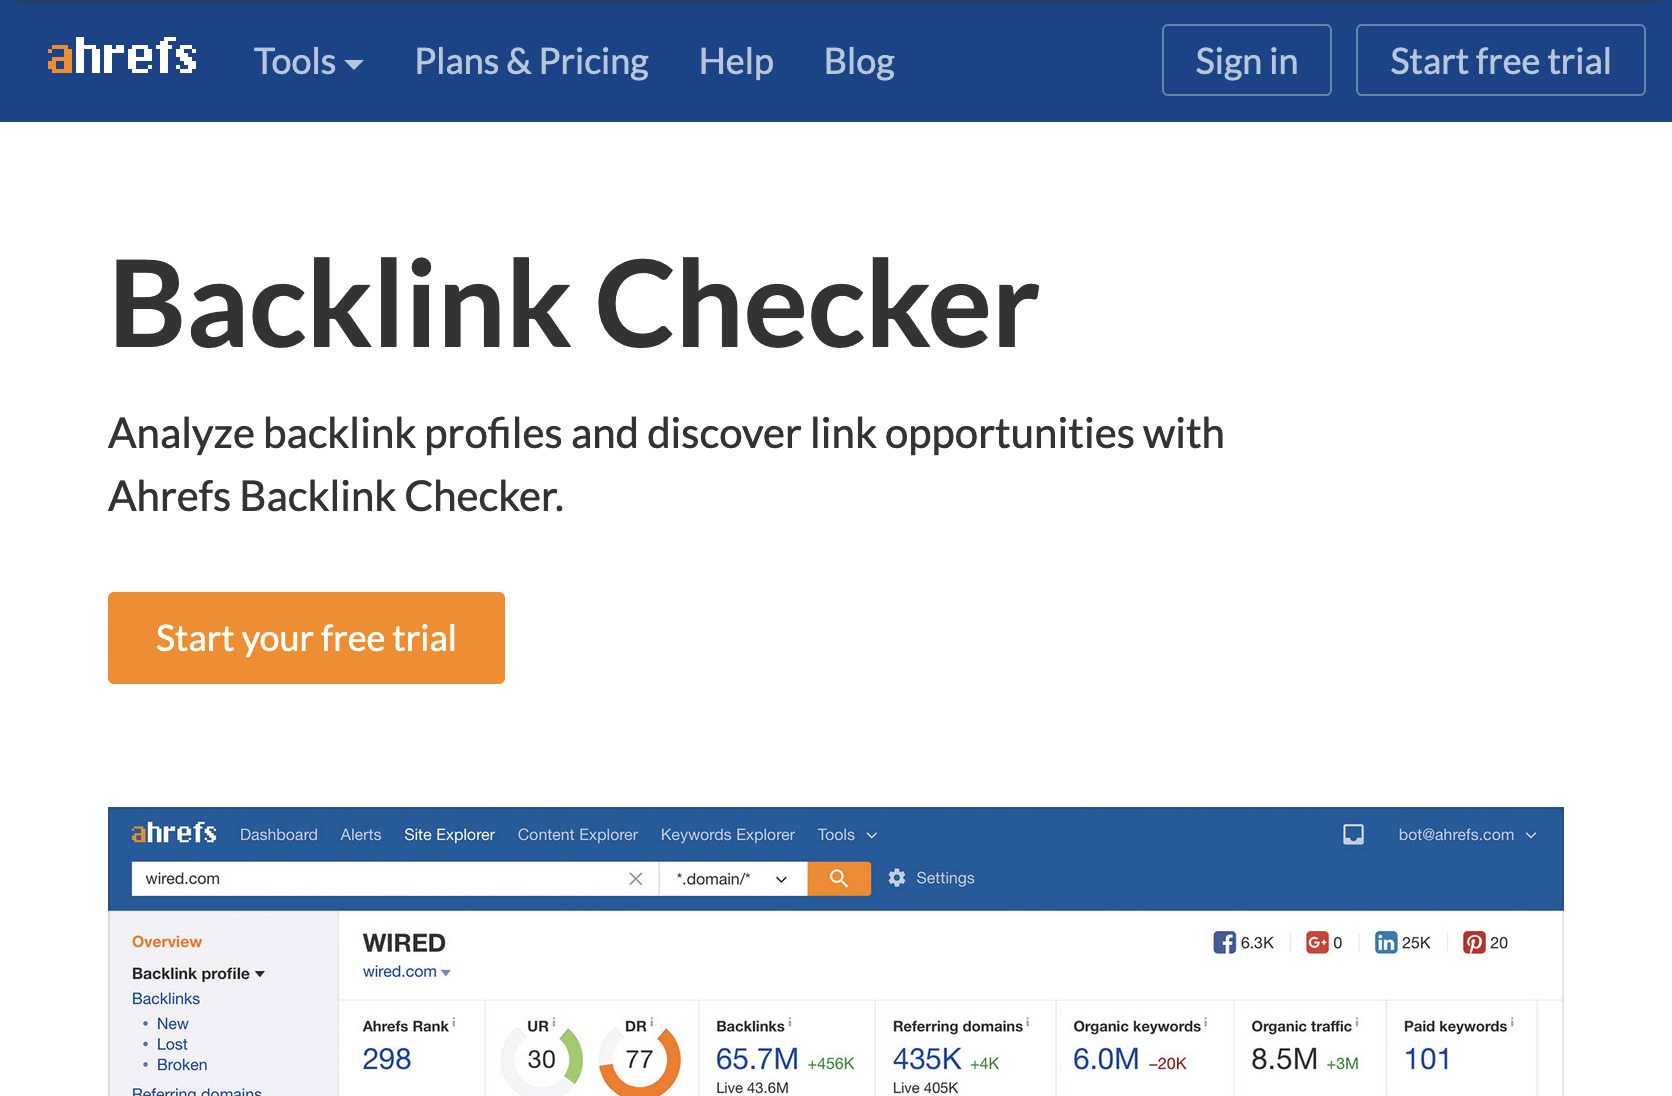 Our original backlink checker page didn't match search intent
